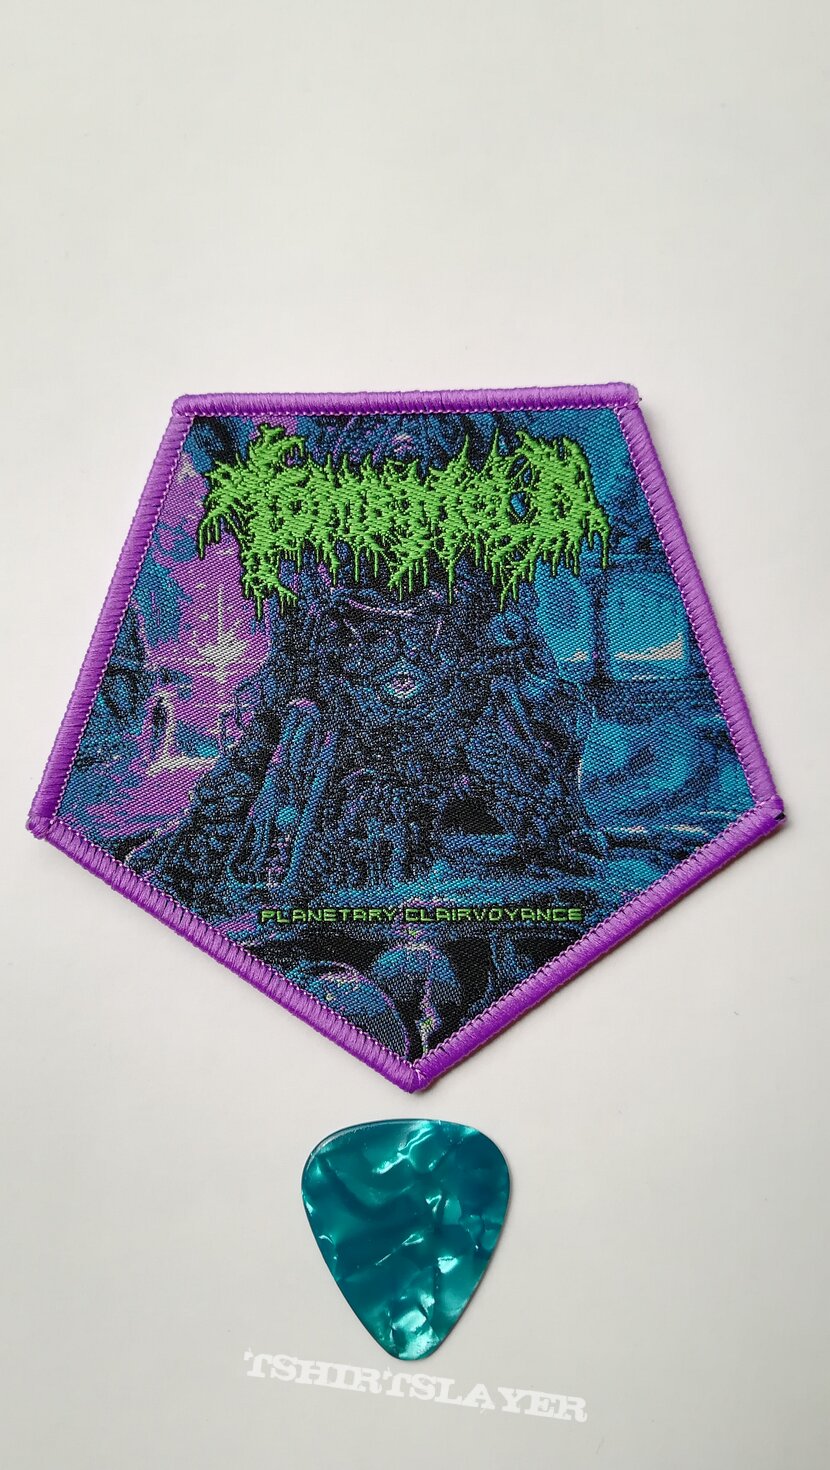 Tomb Mold - Planetary Clairvoyance - Patch 